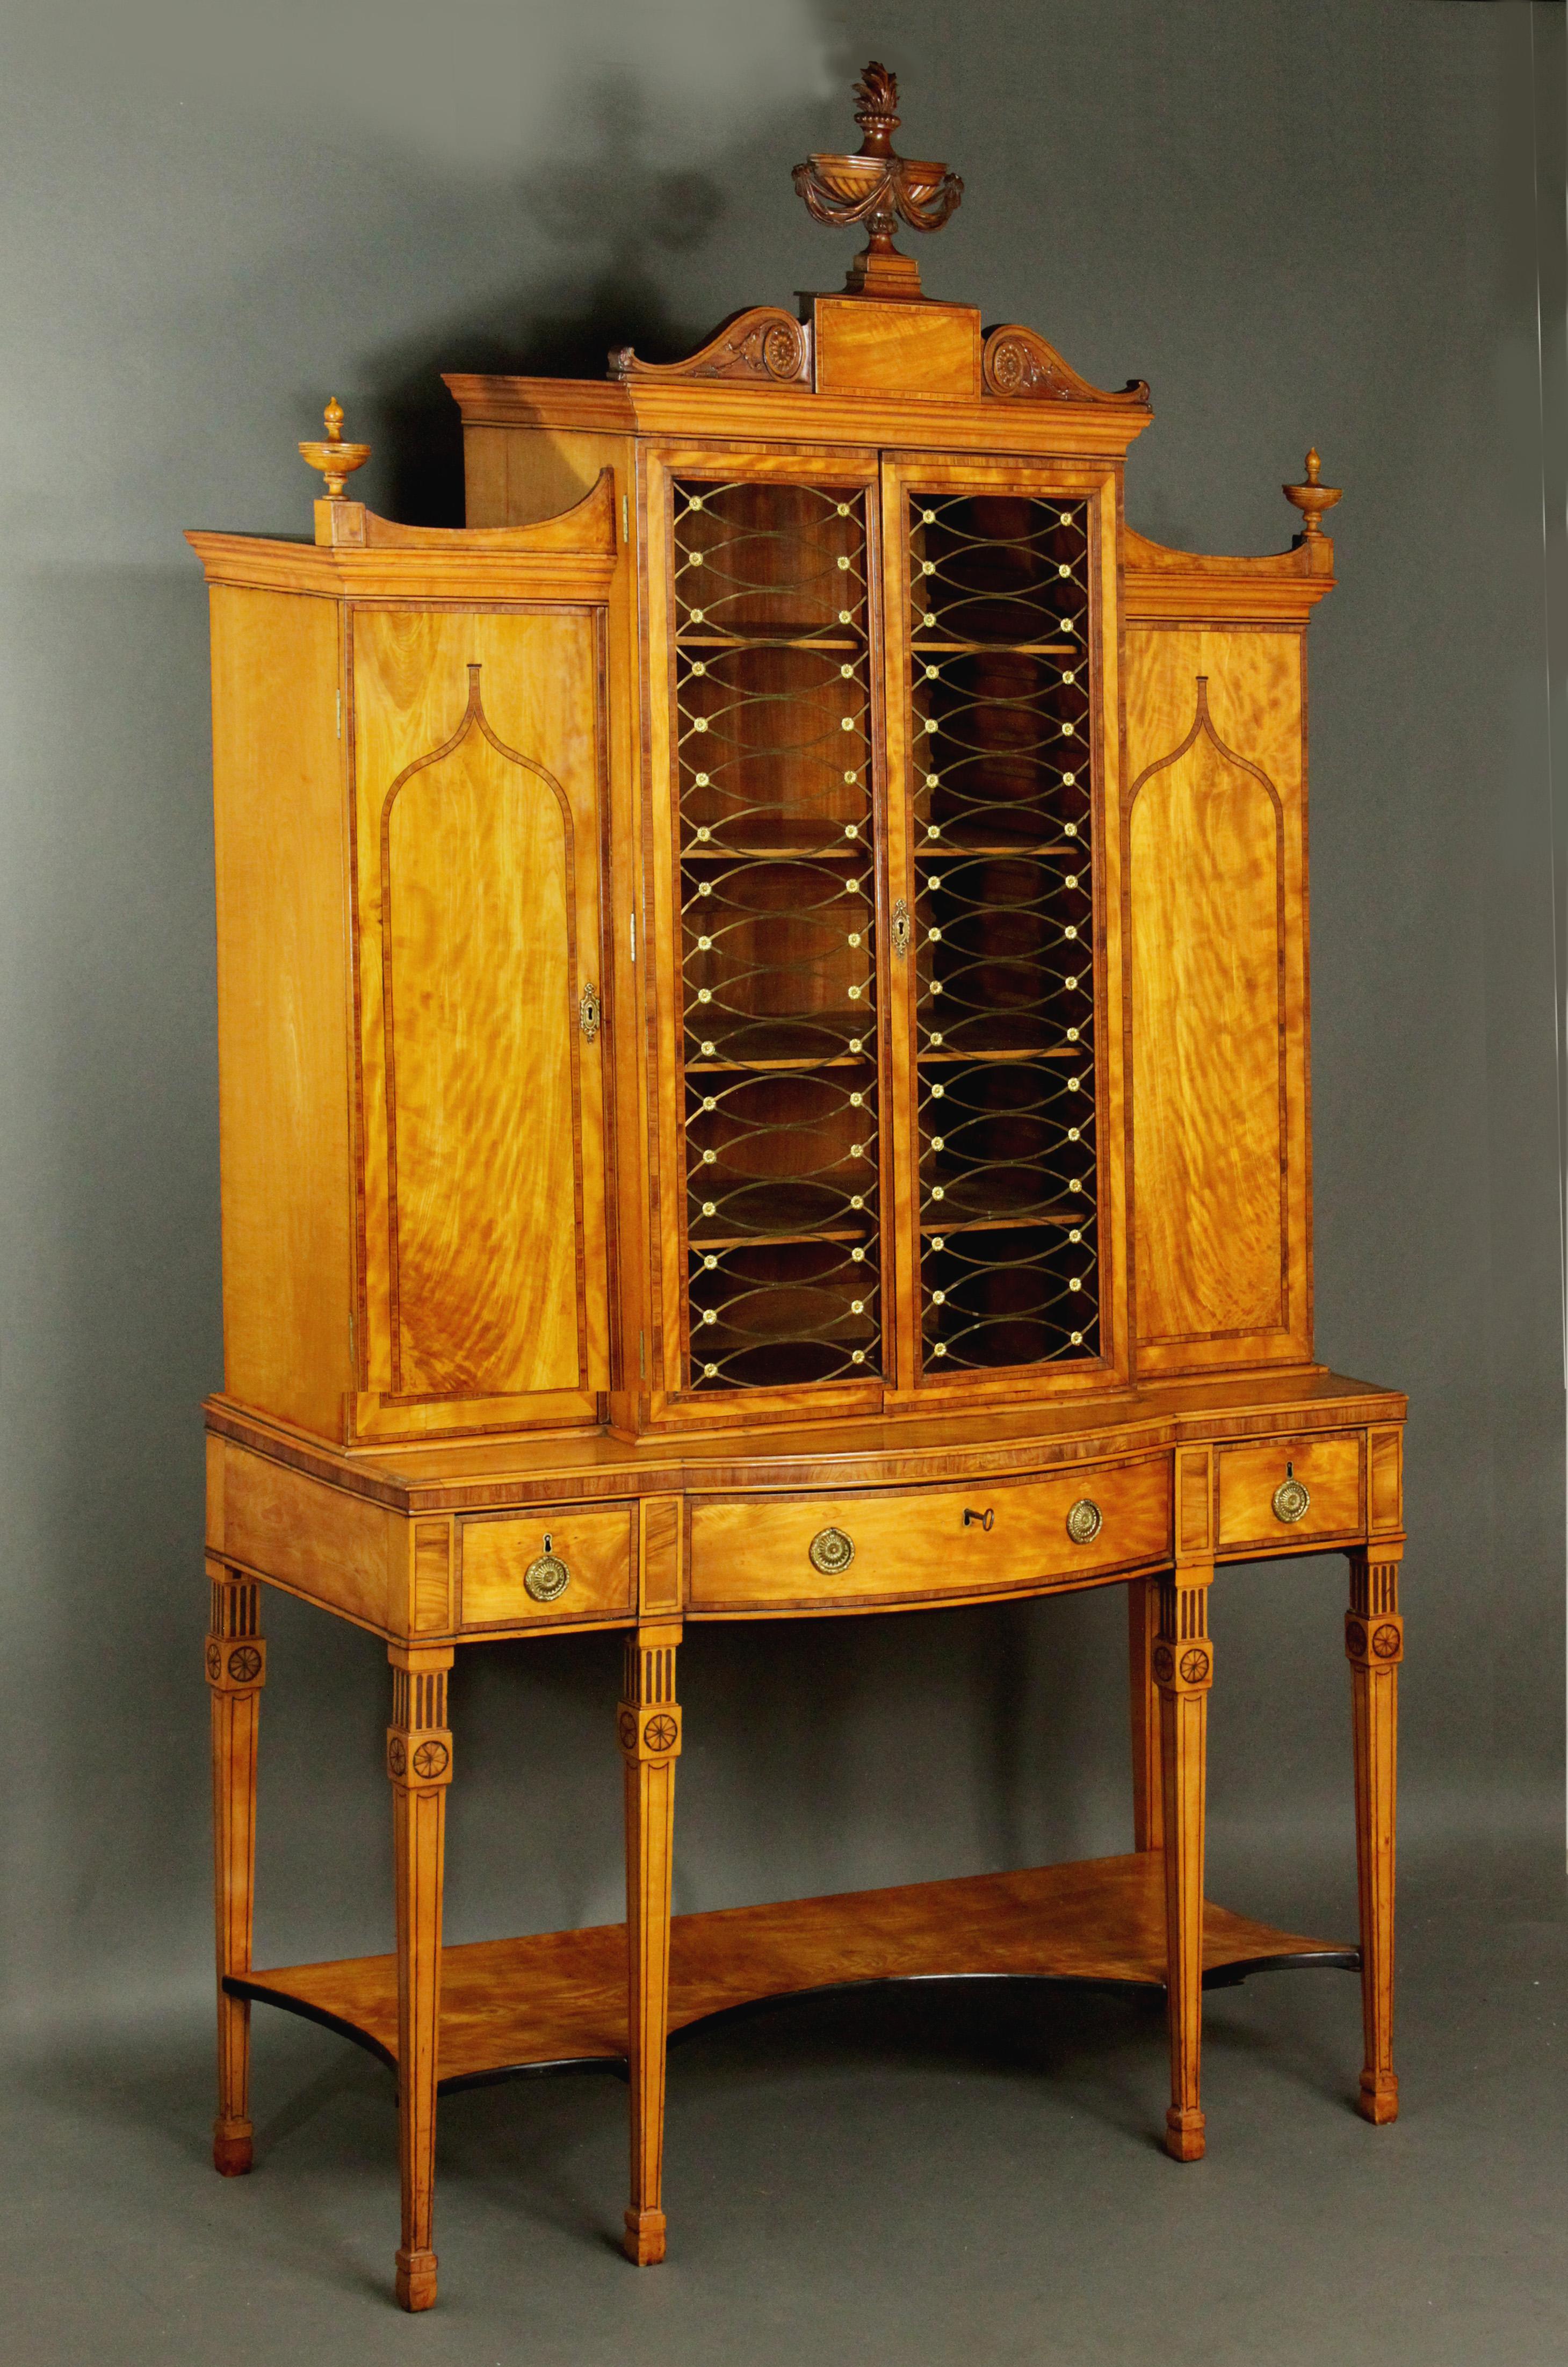 An exceptional George III satinwood breakfront cabinet in the manner of Thomas Sheraton with kingwood and box wood and ebony stringing. Although the design for the bookcase does not appear in the Sheraton Director, many of its characteristics are